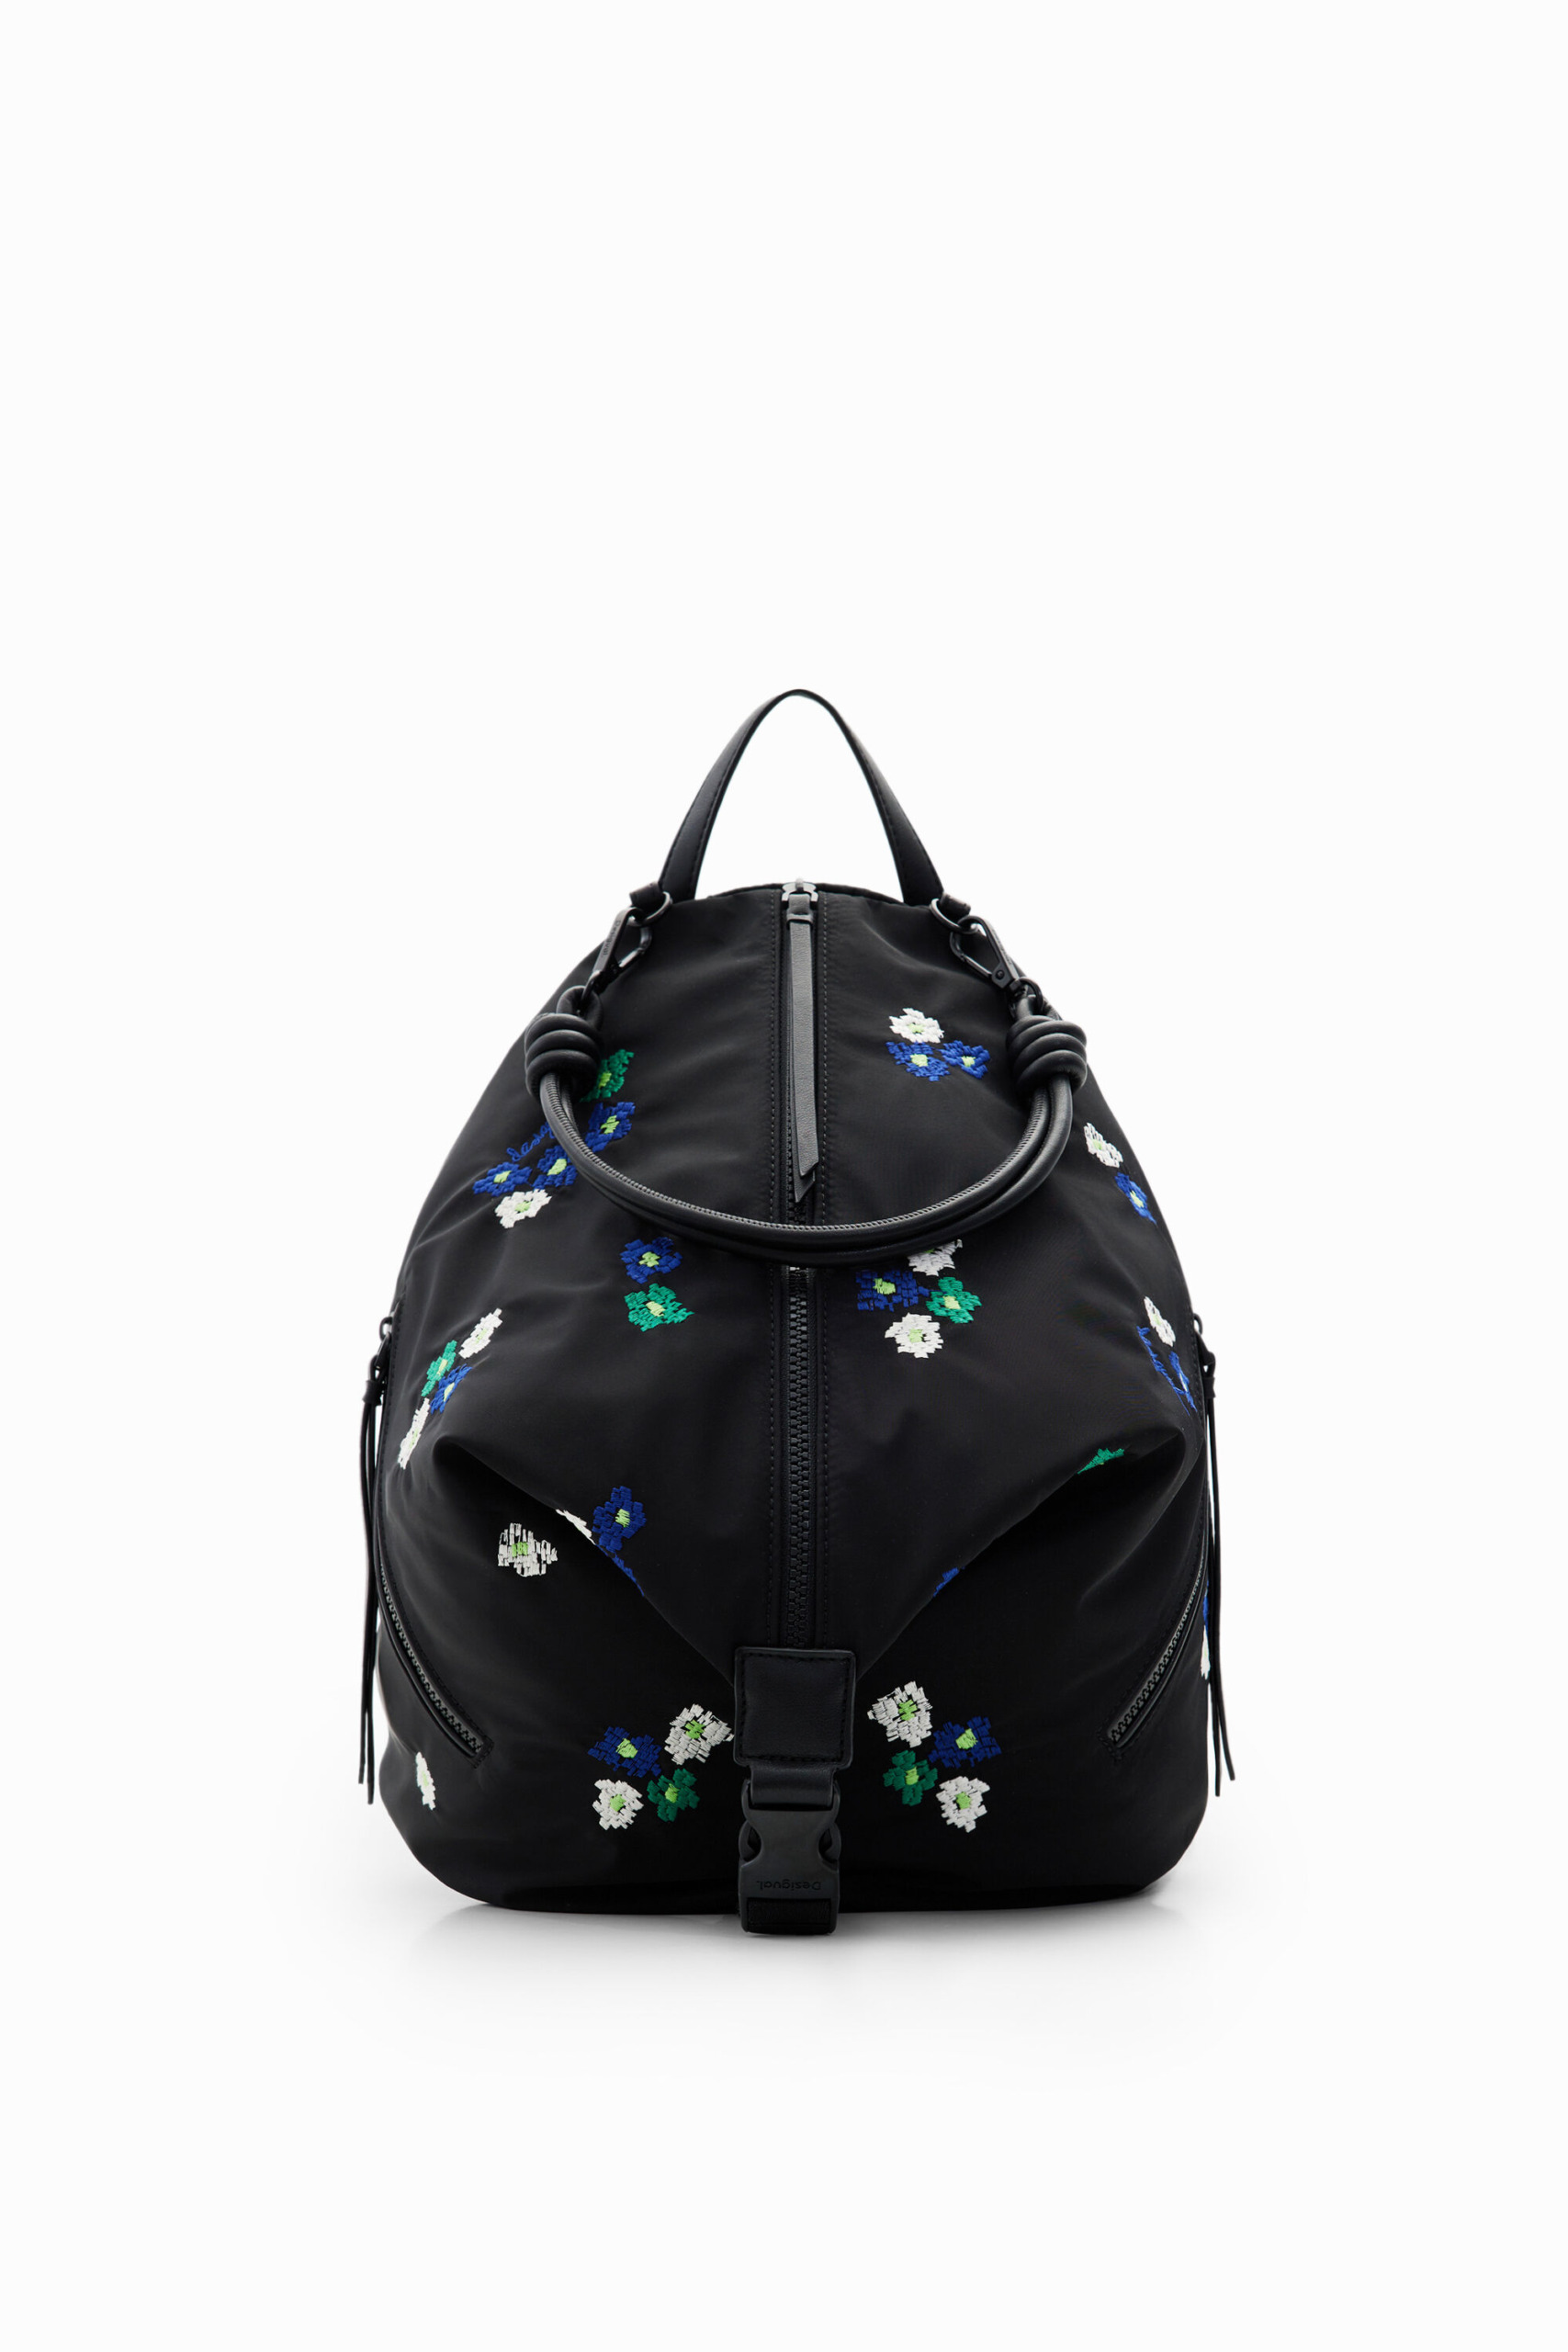 Dedigual Midsize multi position floral backpack 23WAKA03 2000 2 a